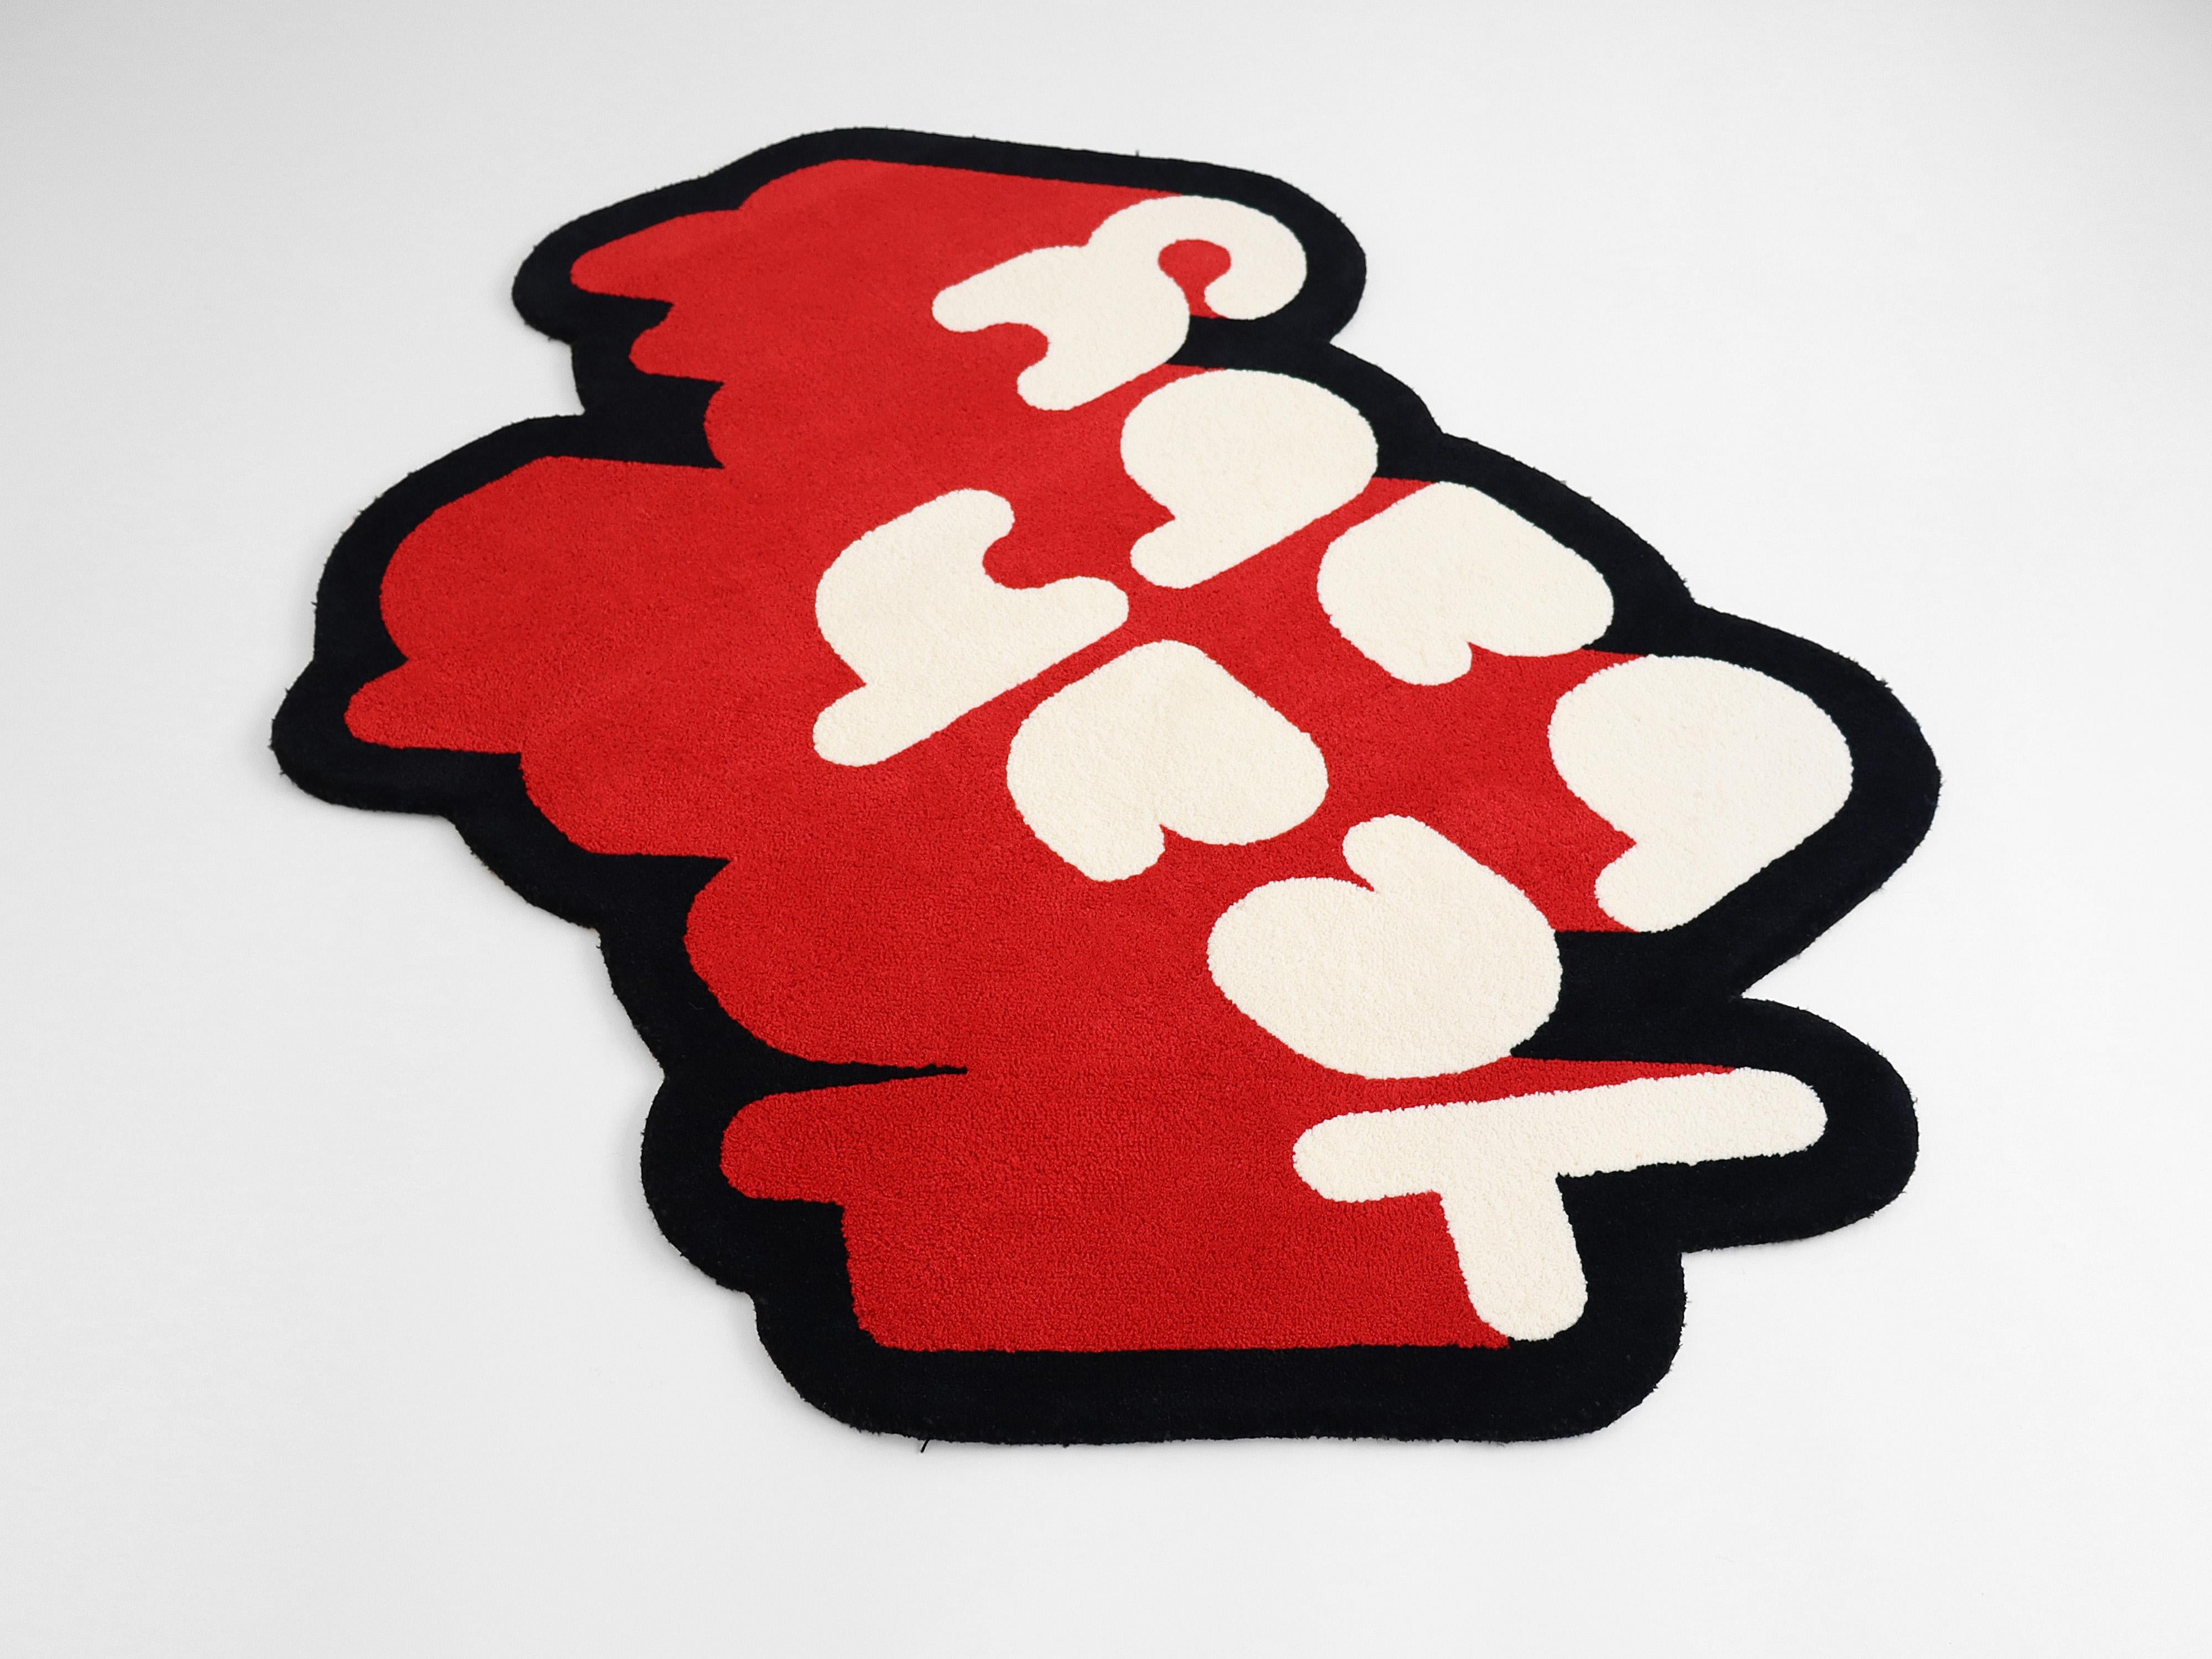 Red, White and Black Yeah Baby Rug from Graffiti Collection by Paulo Kobylka For Sale 3